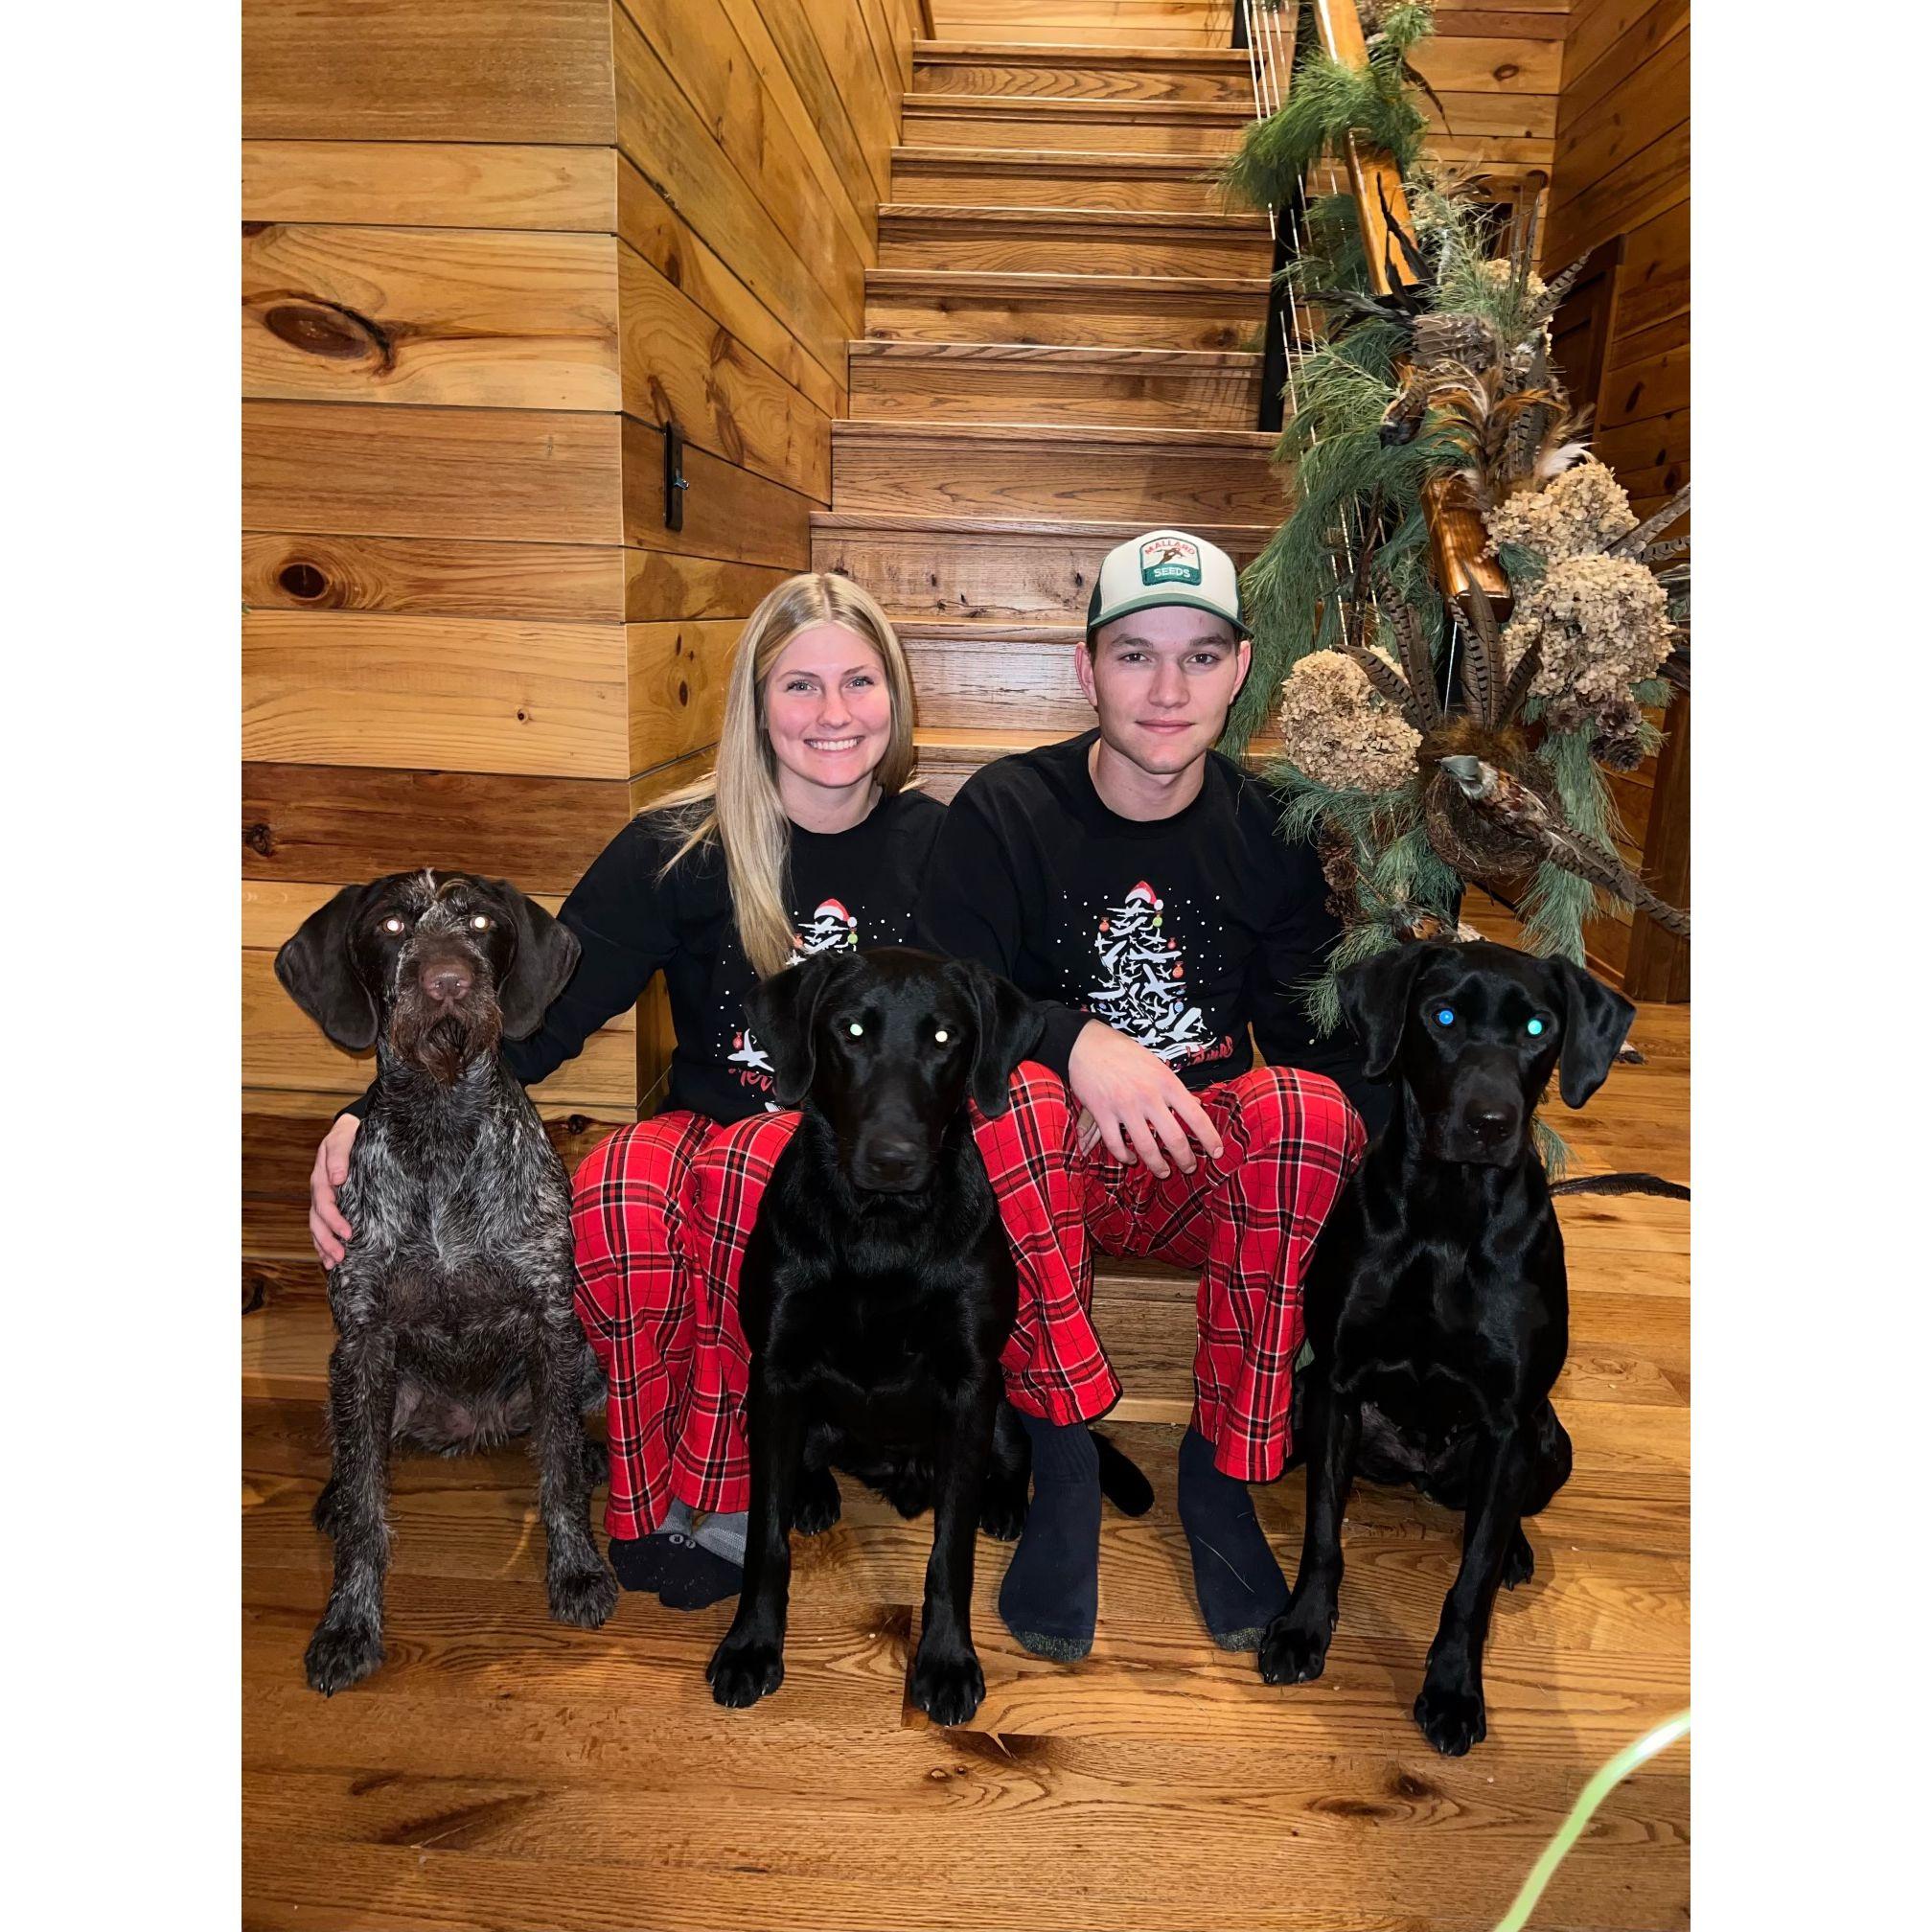 Christmas 2022 with our sweet pups Rowyn, Creed, and Lucky!